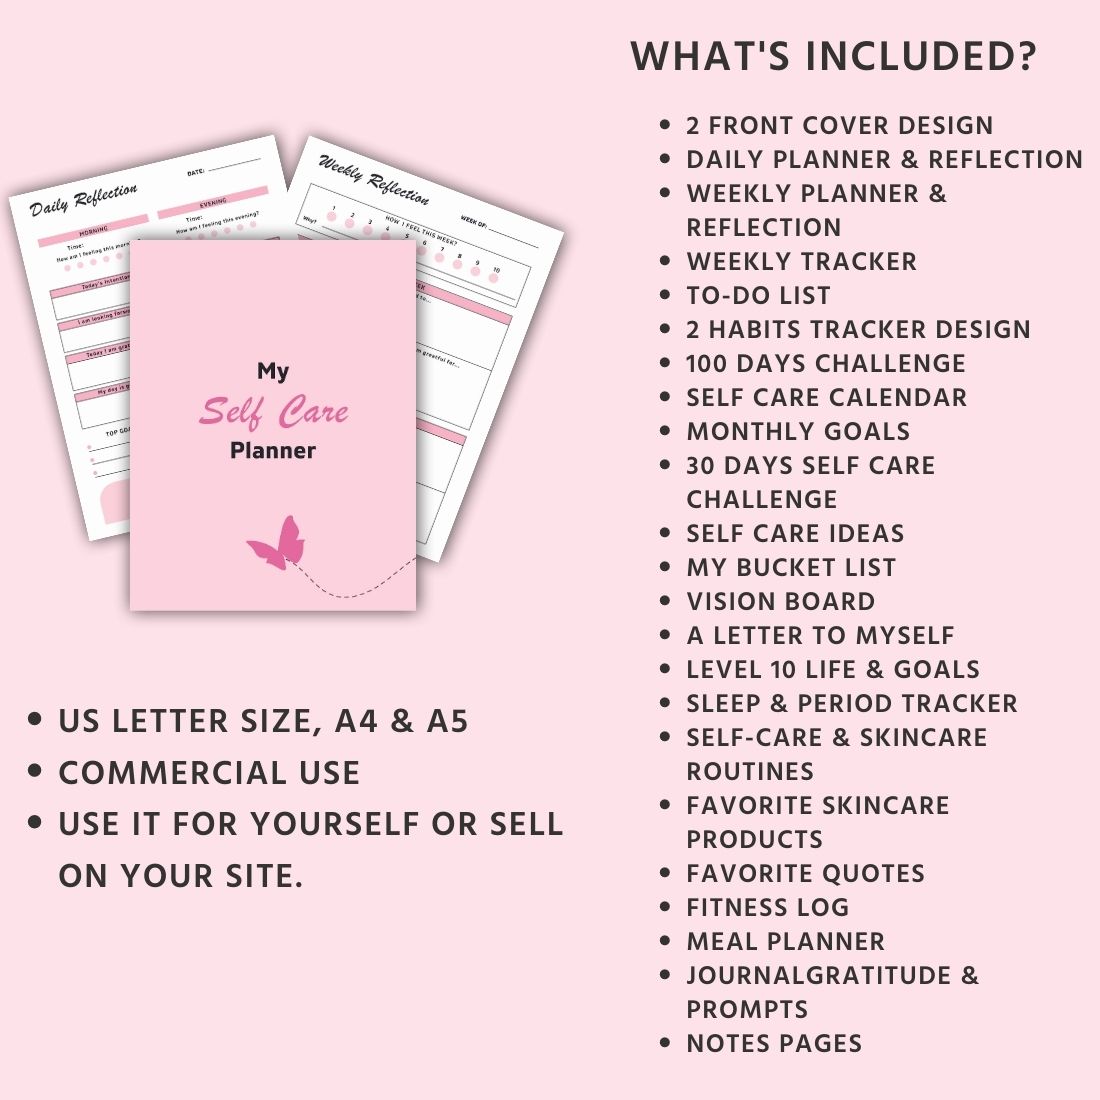 Self Care Planner preview image.